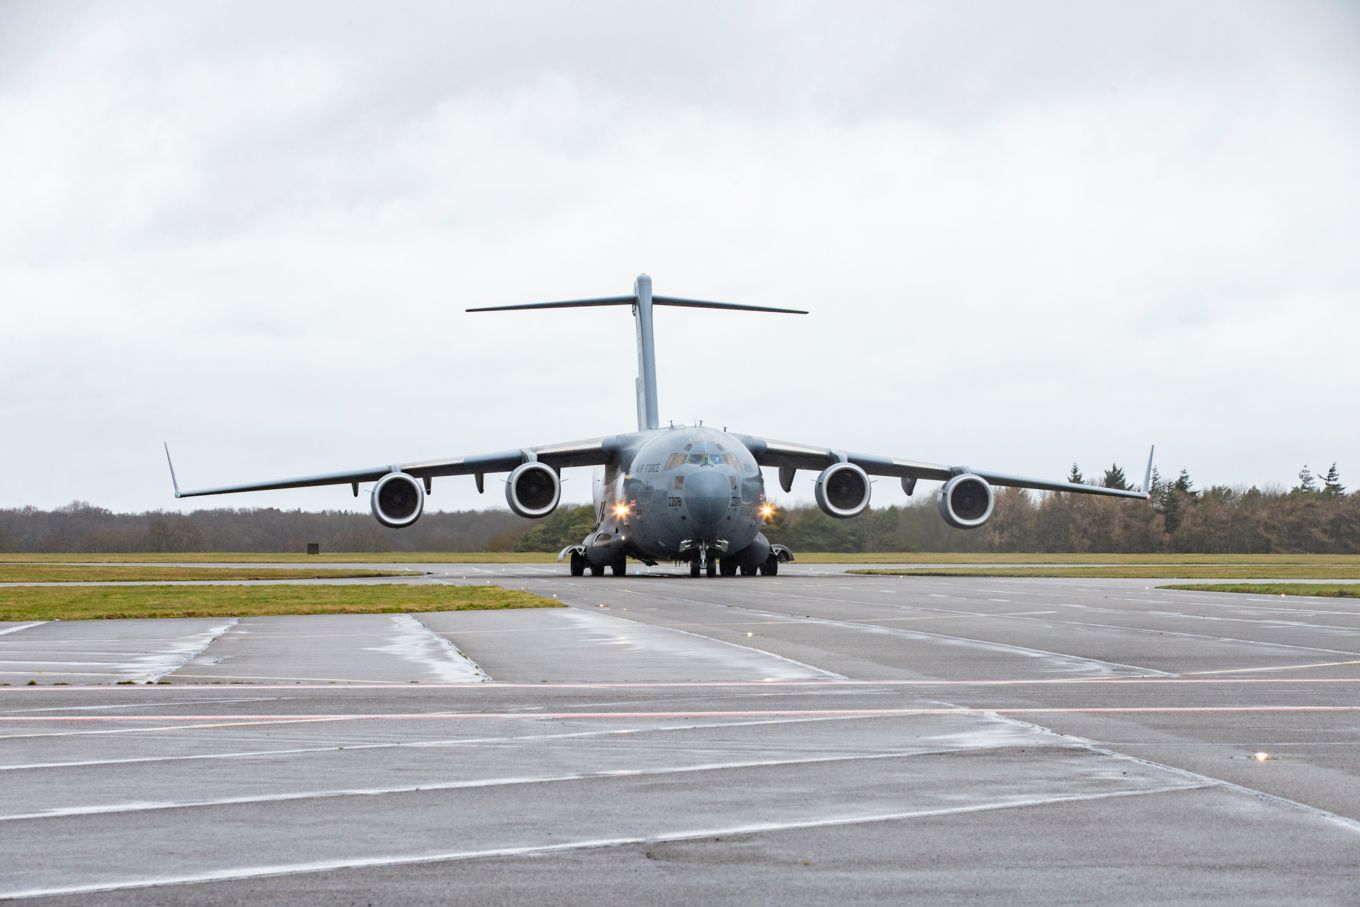 A C-17 aircraft at RAF Wittering in March 2019.